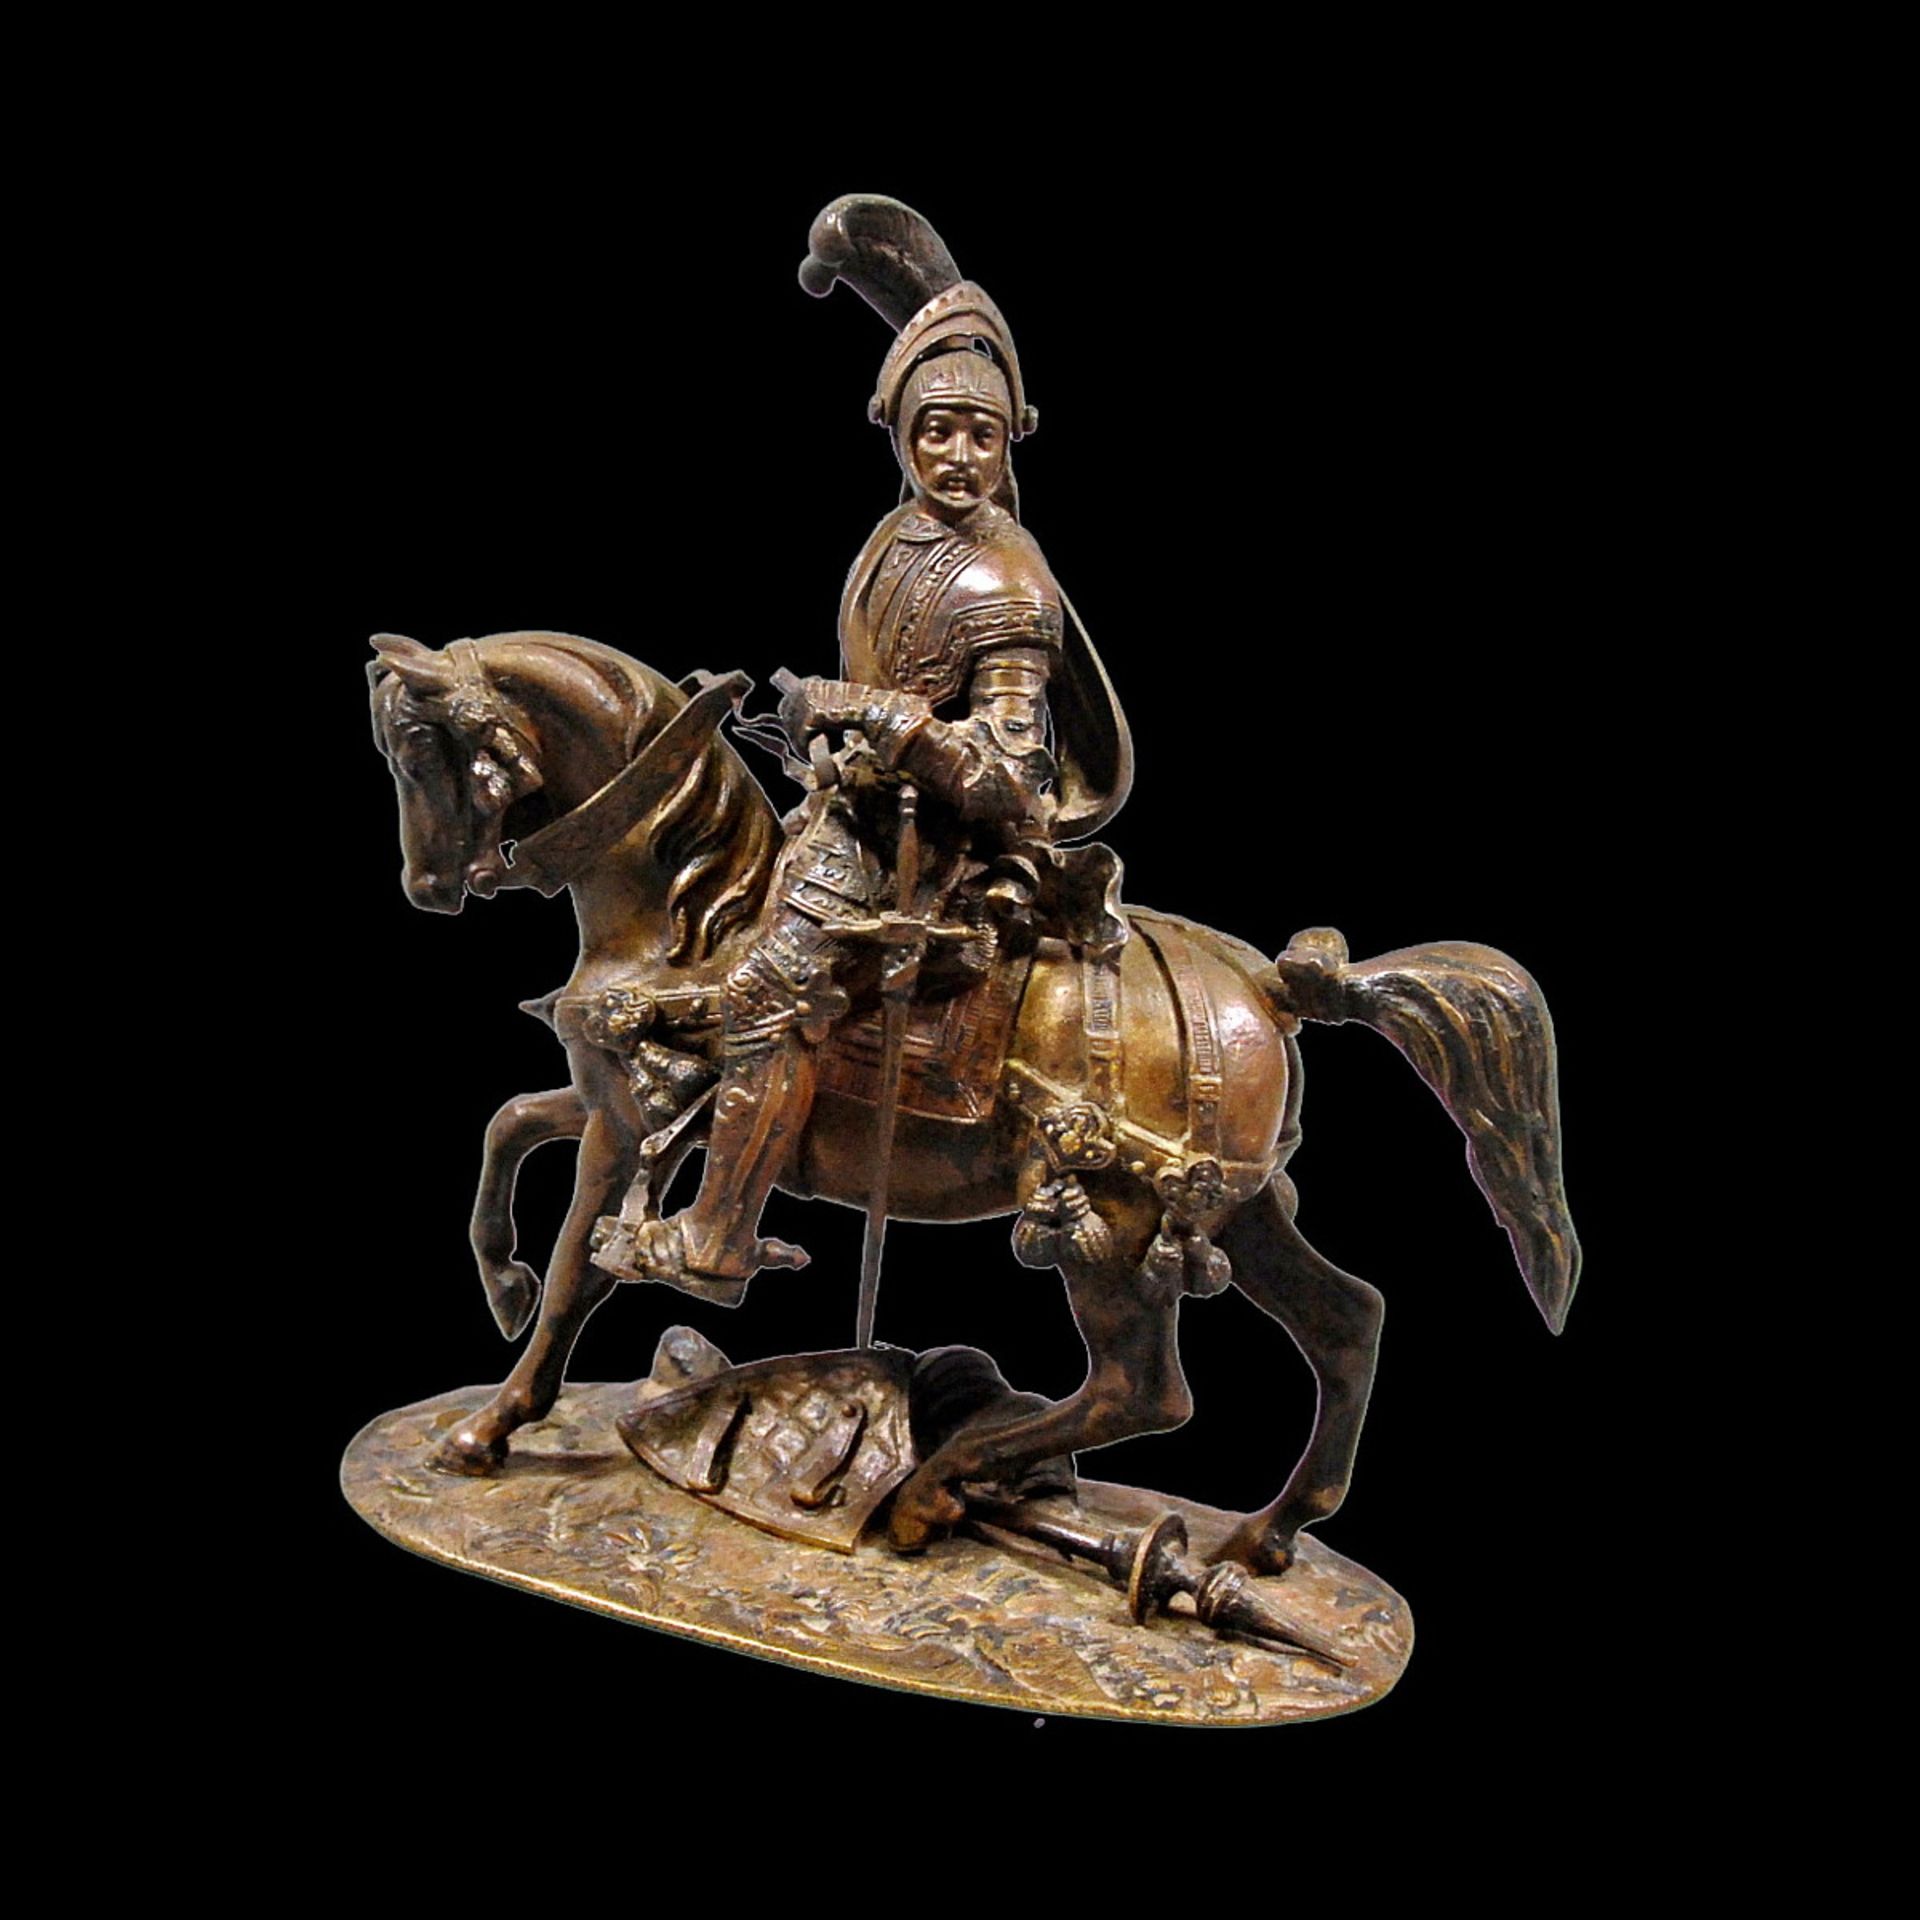 A bronze composition depicting an equestrian knight of the medieval period at a tournament.